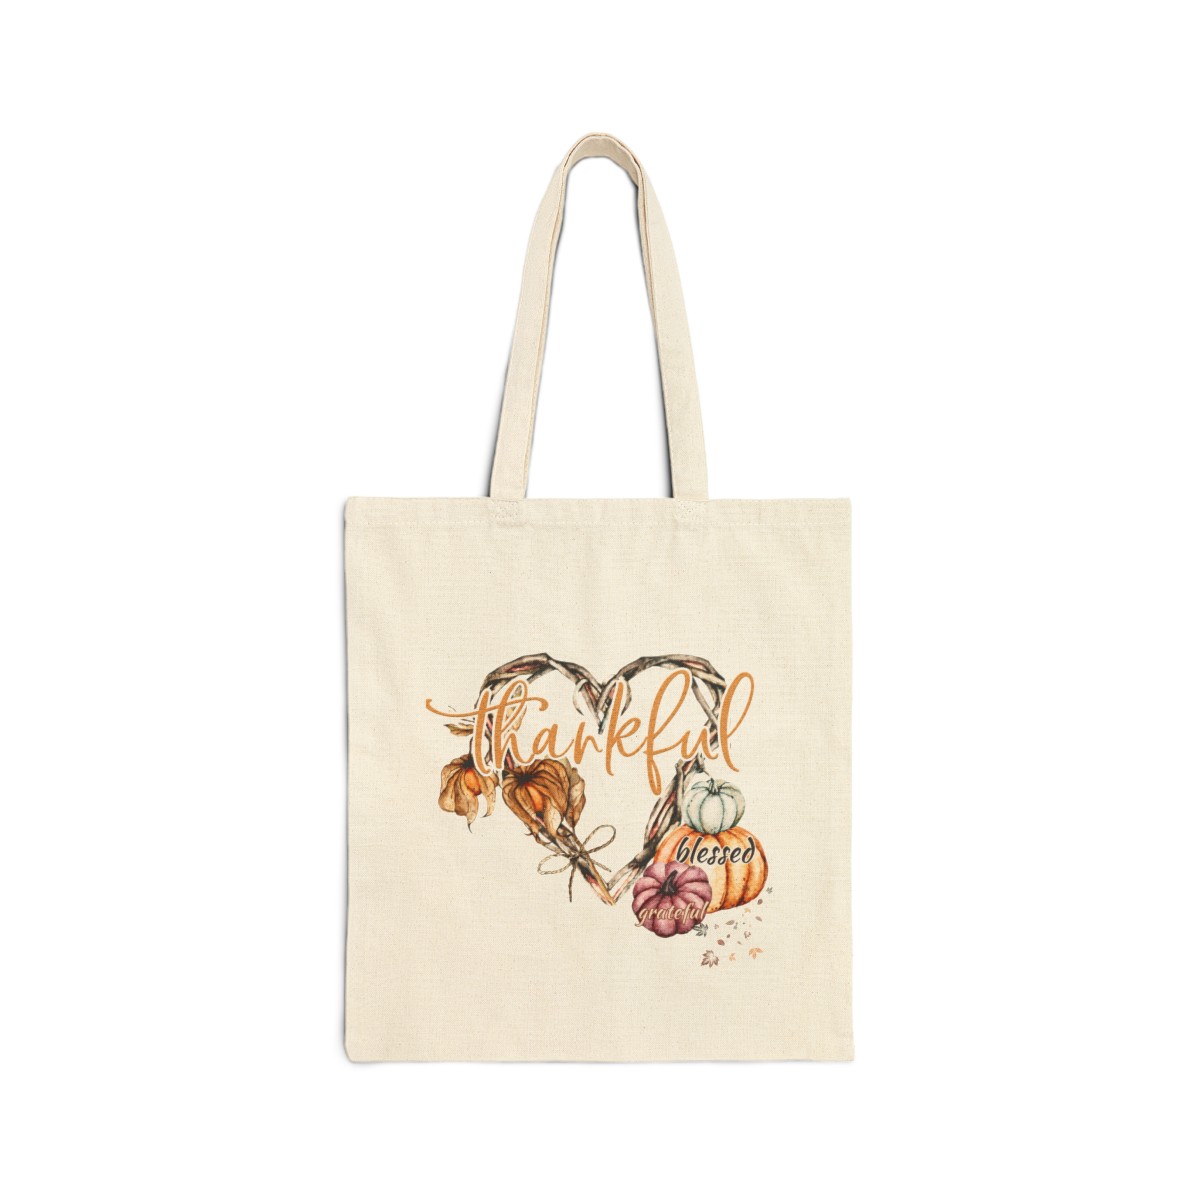 Thankful Cotton Canvas Tote Bag product main image